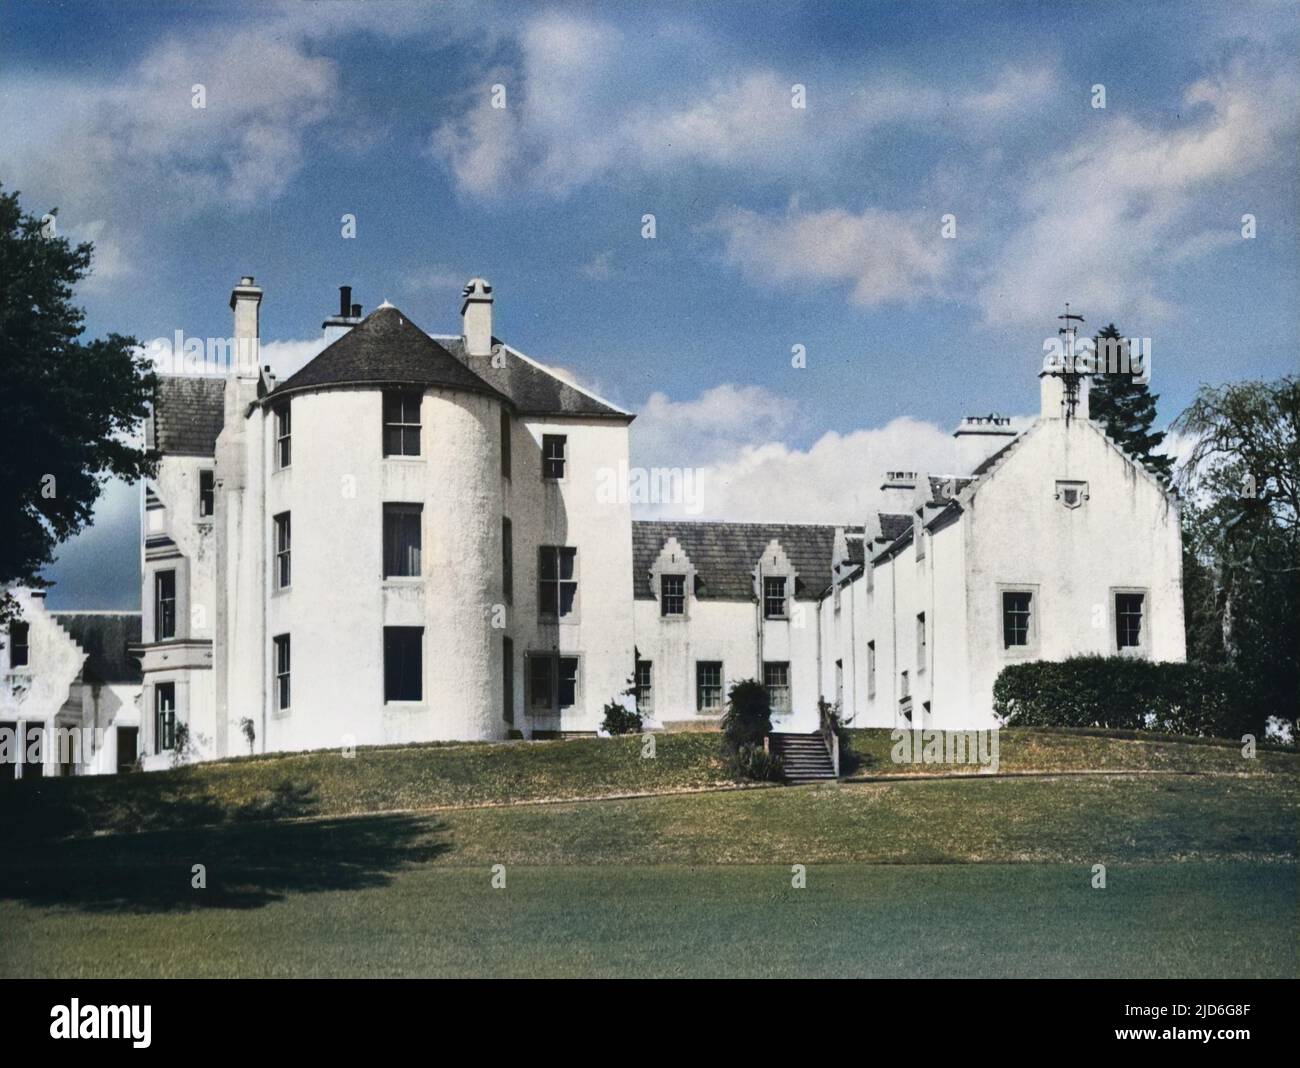 ANNIE LAURIE Maxwelton House, Dumfries- shire, Scotland, the birthplace of Annie Laurie in 1682, after whom a famous Scottish ballad was named. Colourised version of : 10171964       Date: 1950s Stock Photo